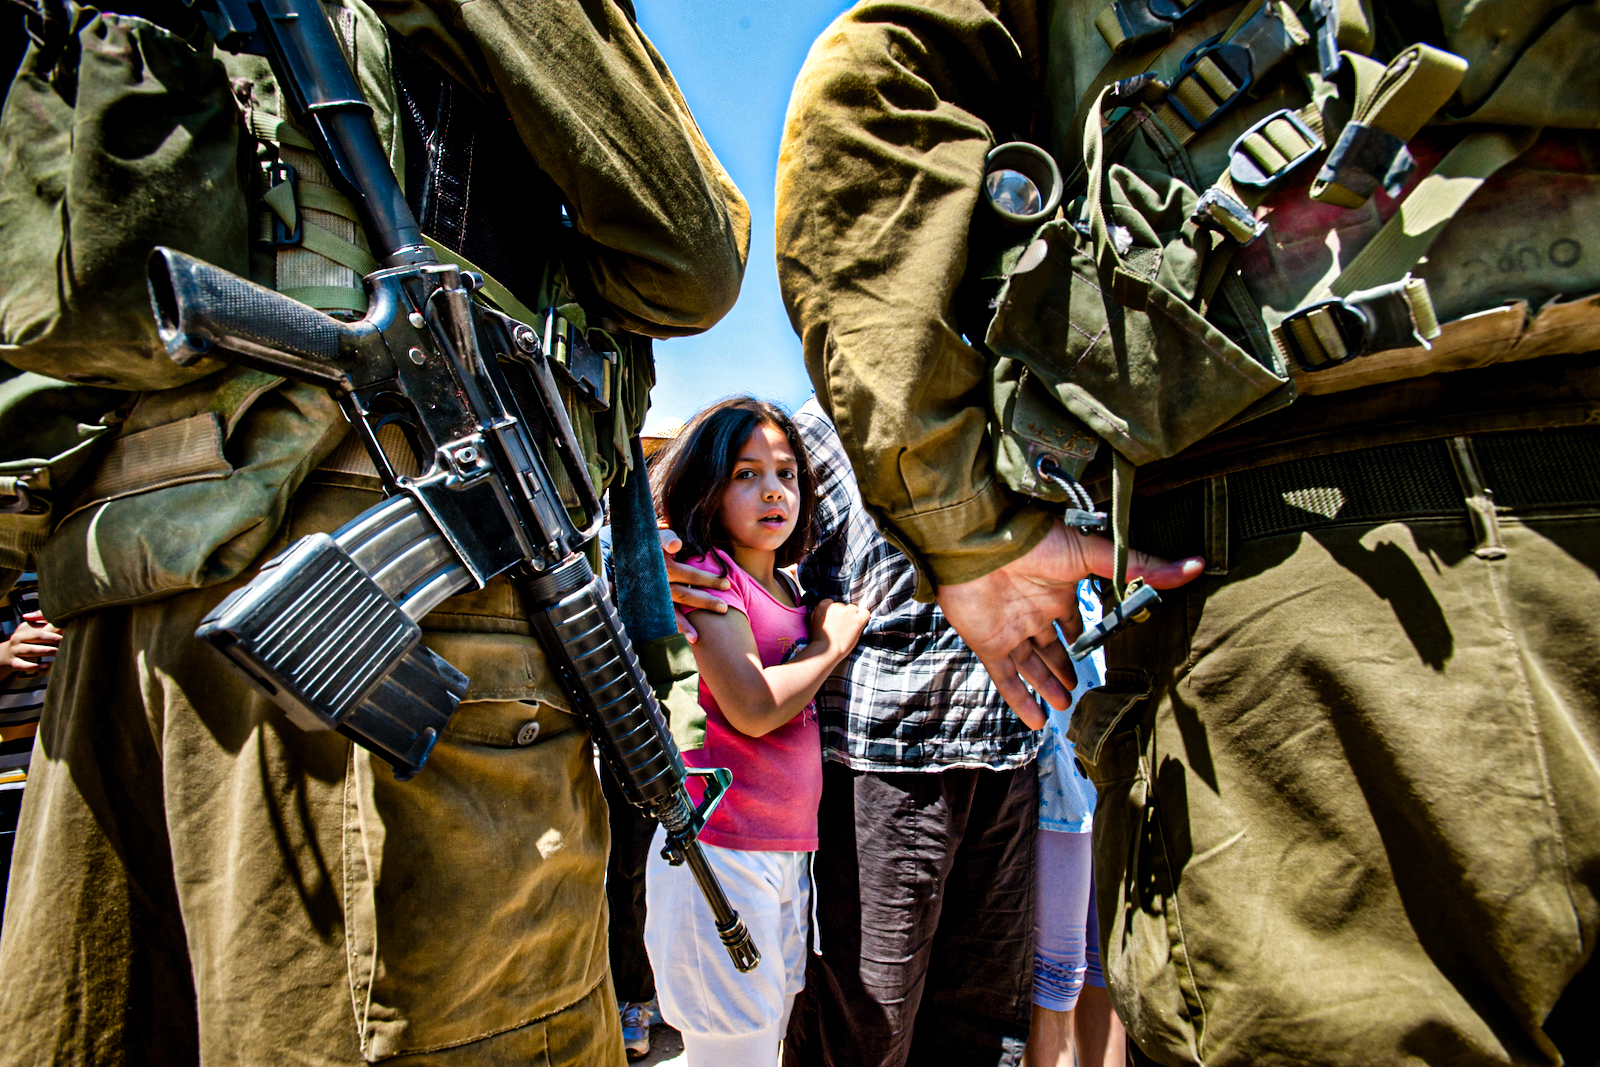 Palestinian girl faces Israeli soldiers in the West Bank